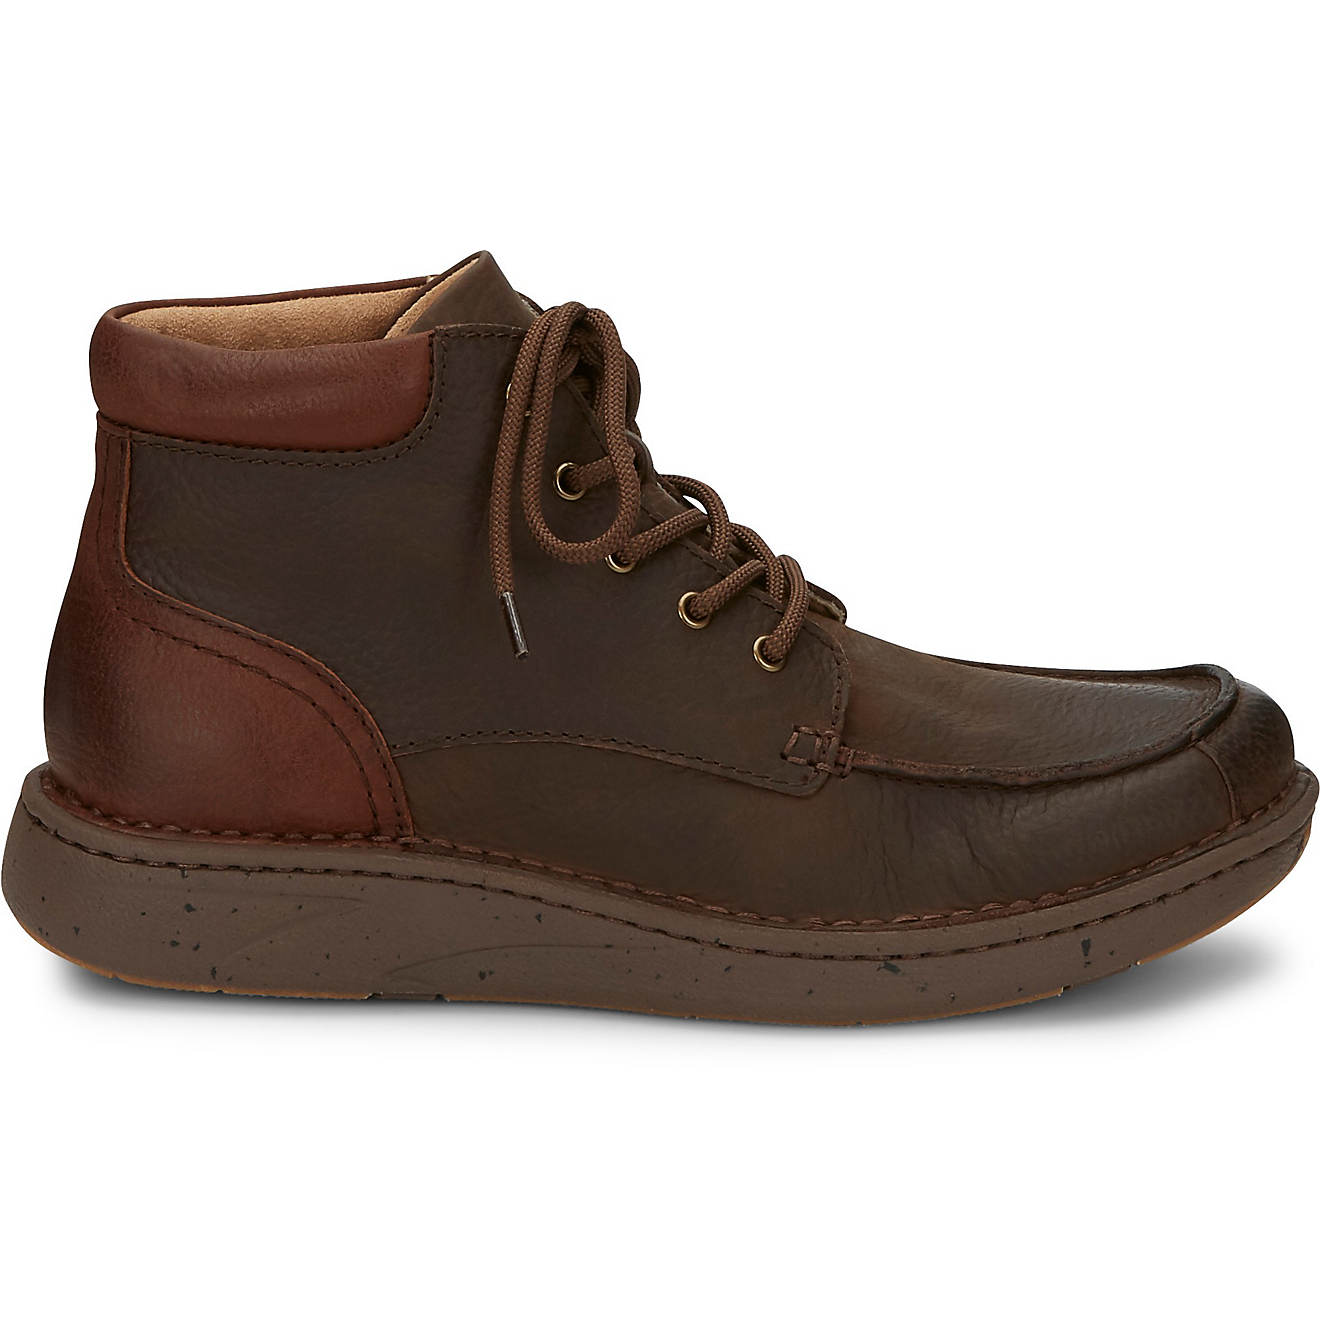 Justin Men's Hitcher Easy Rider Boots | Free Shipping at Academy